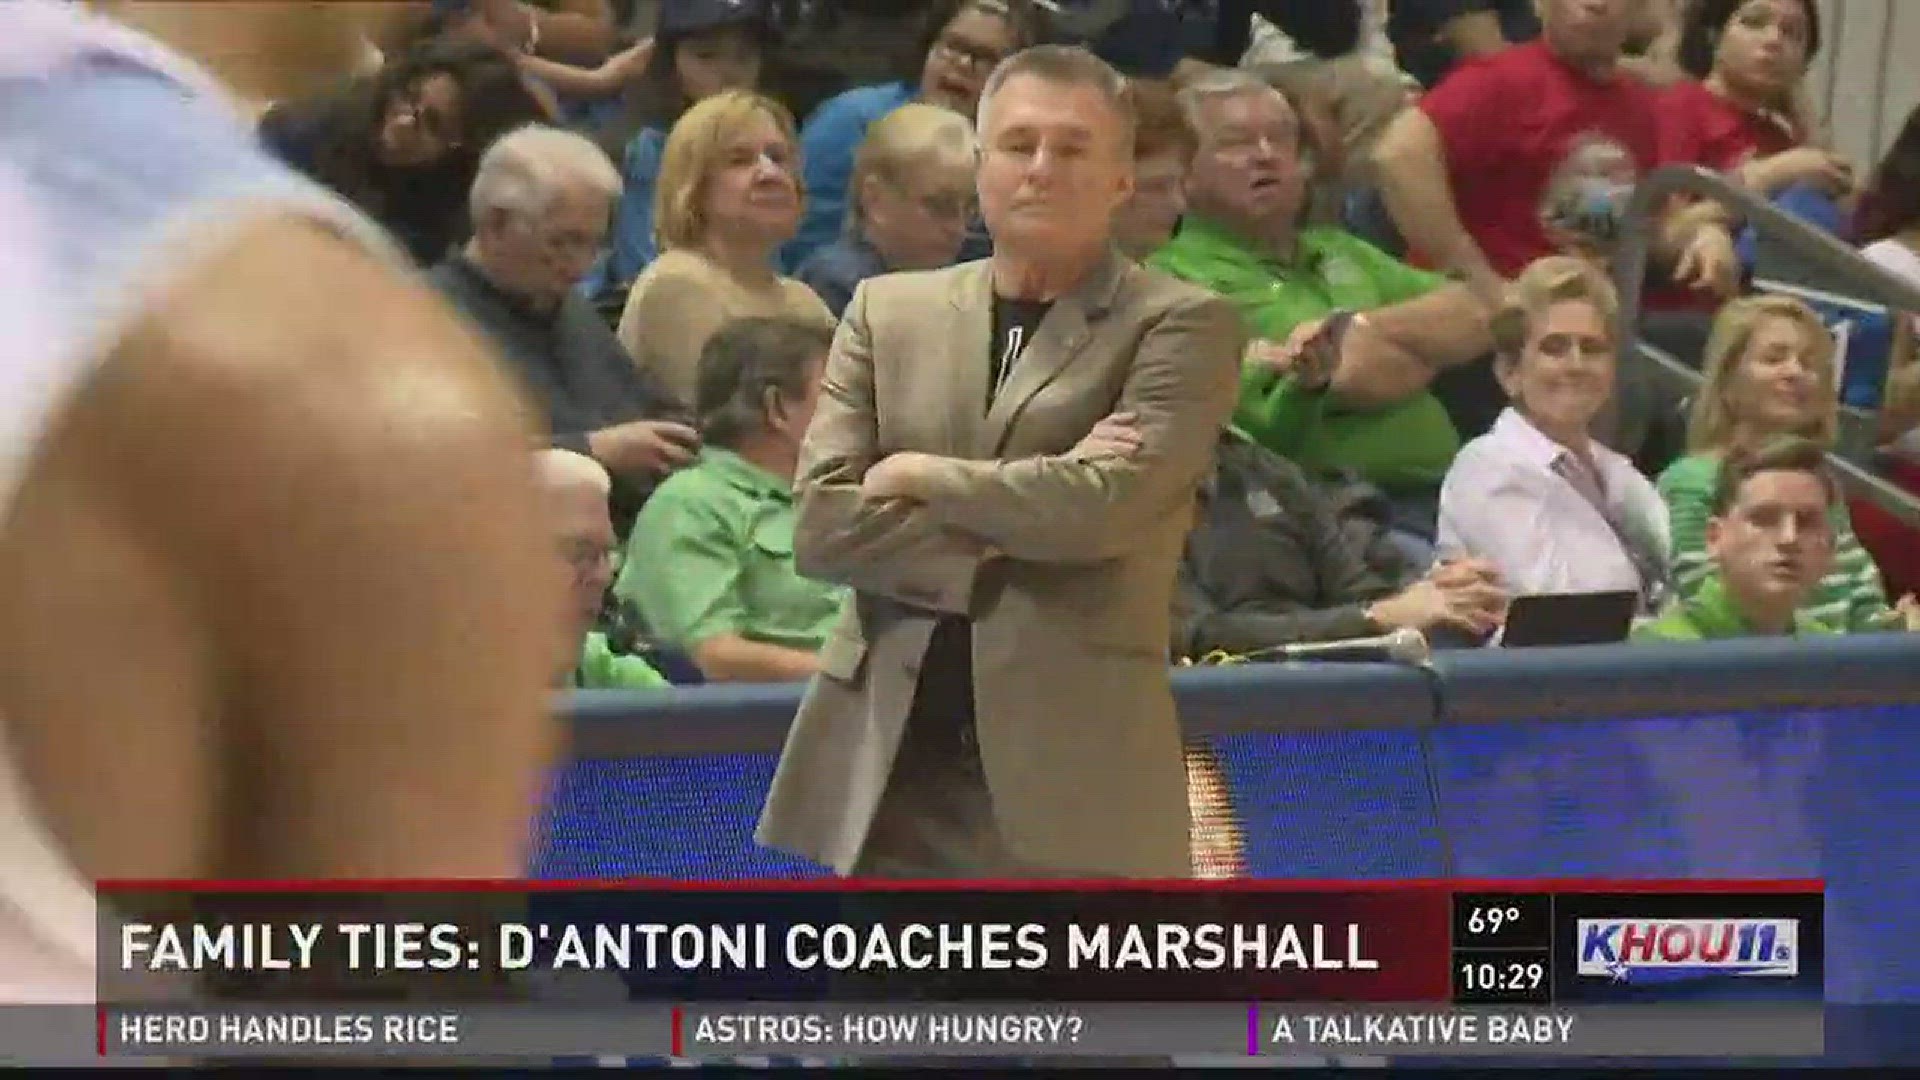 Rockets coach Mike D'Antoni's brother, Dan D'Antoni, was in town Thursday to coach his Marshall men's basketball team against Rice.